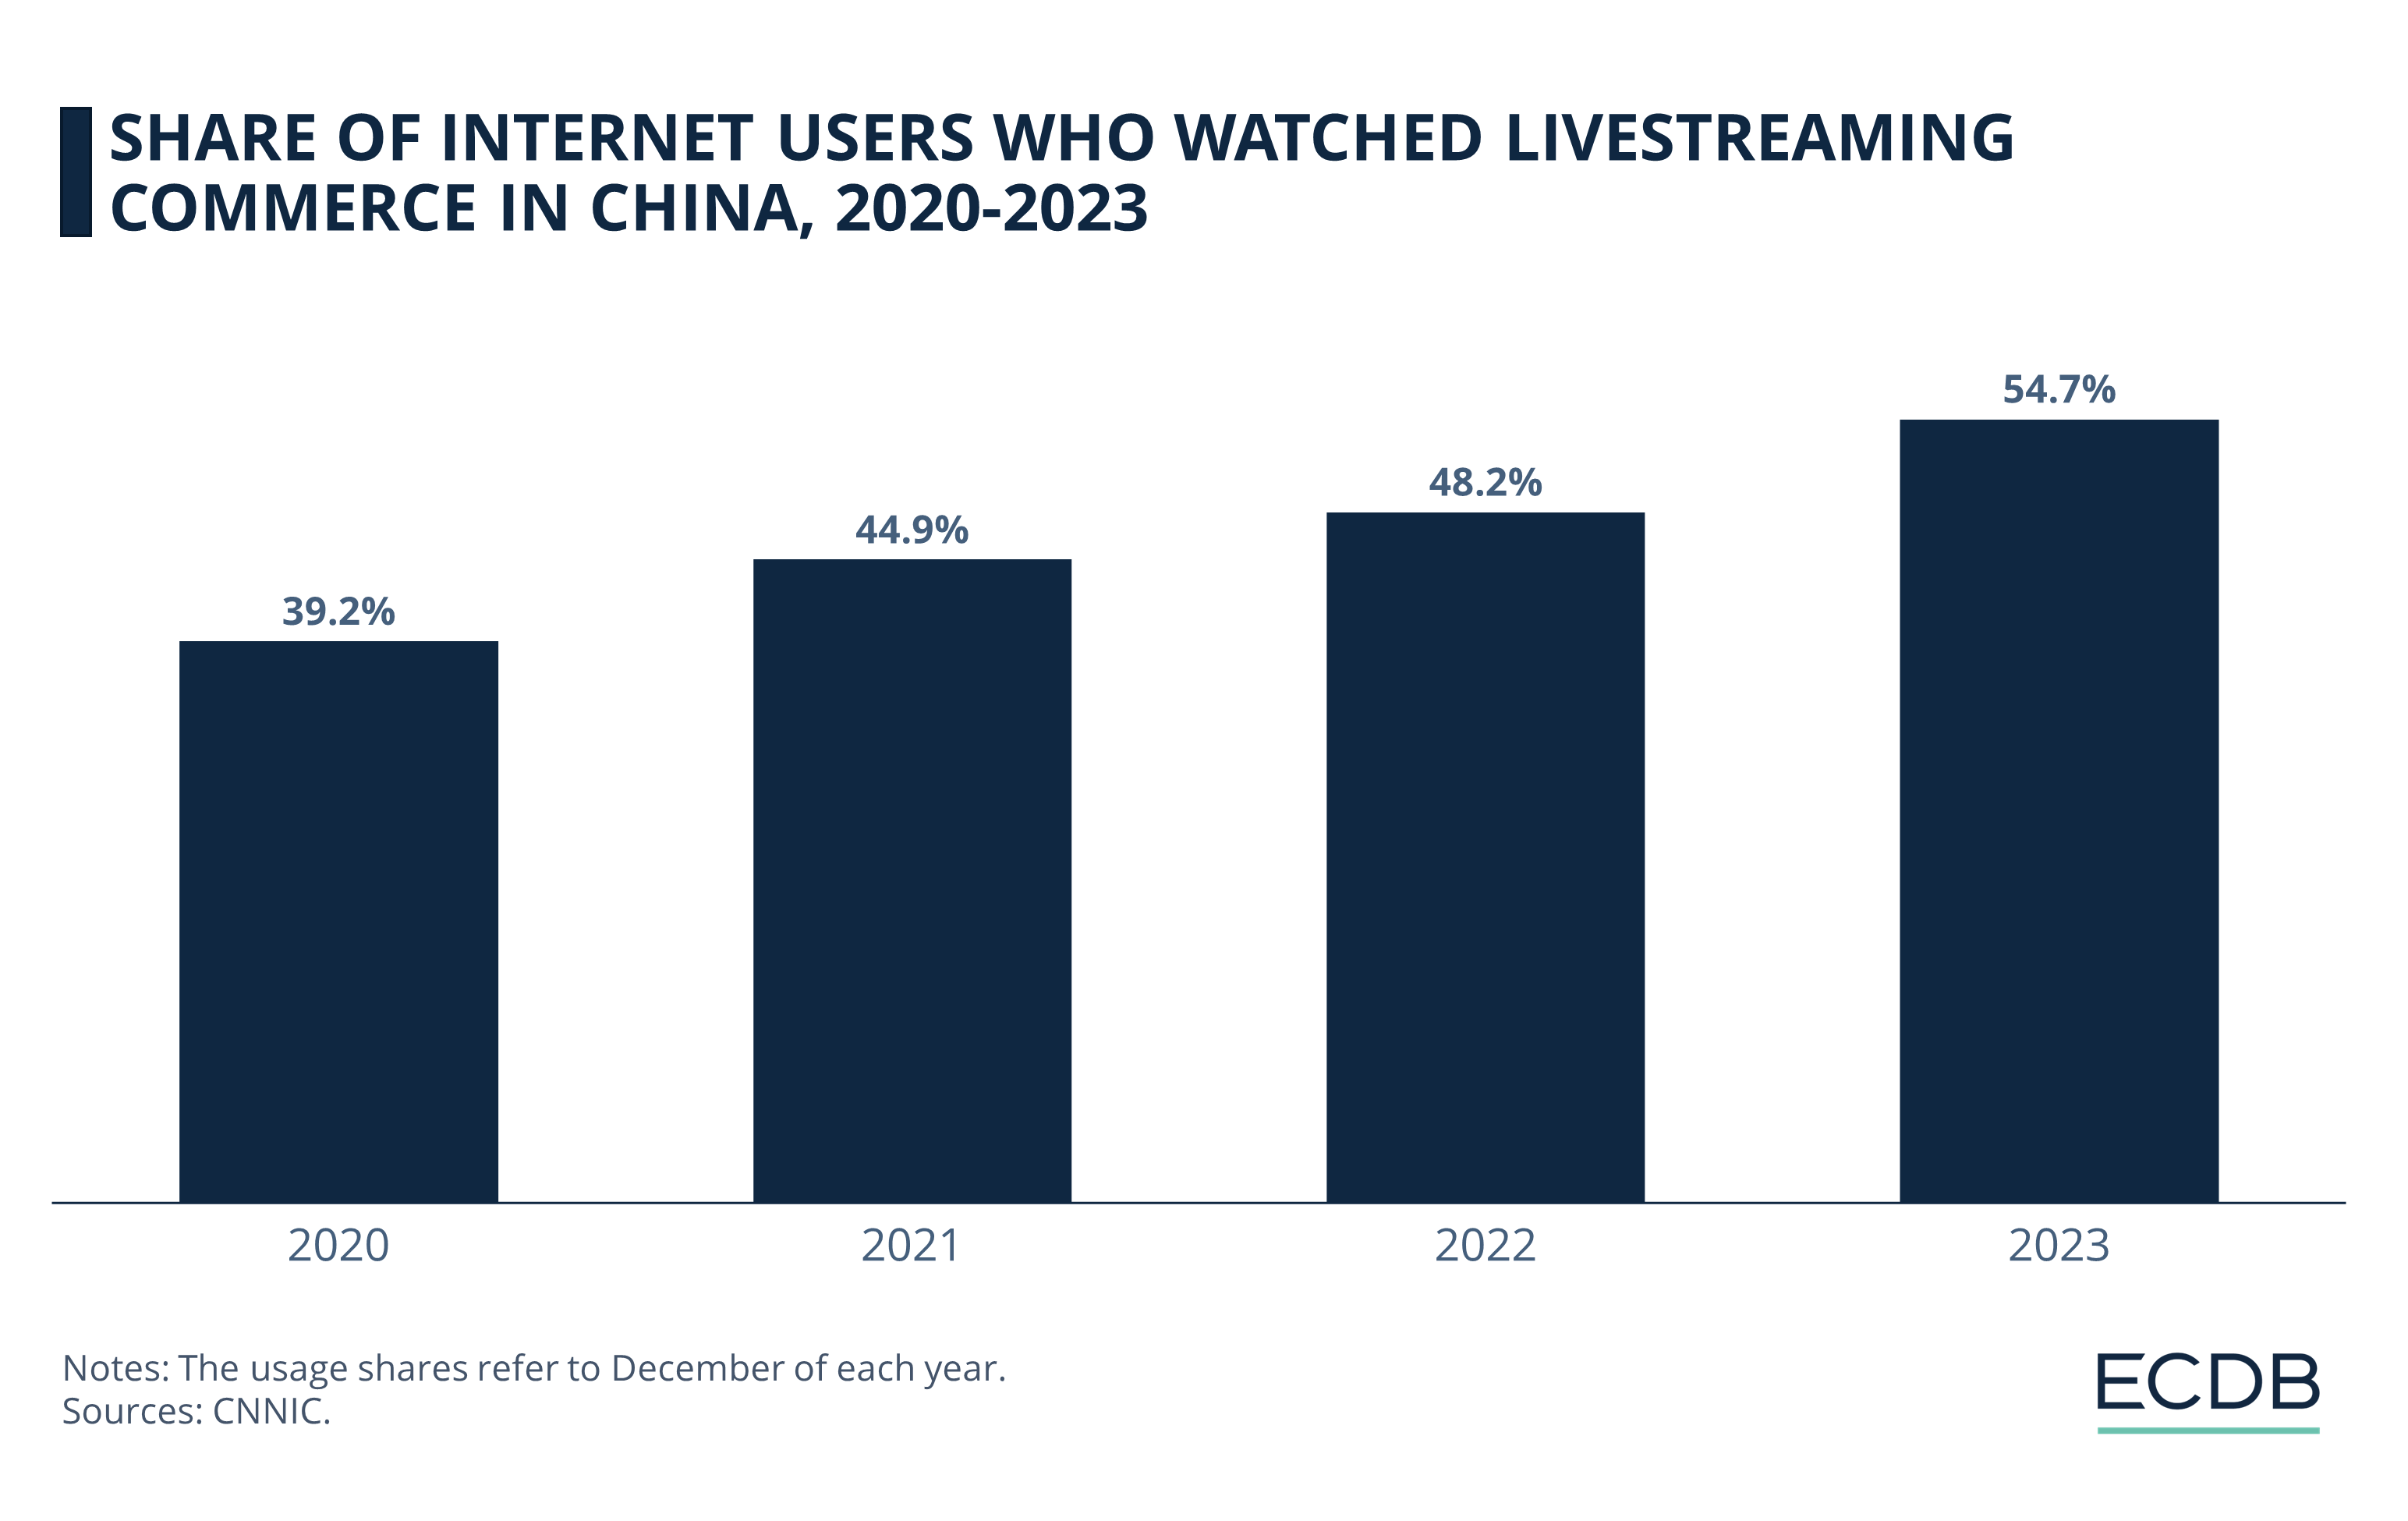 Share of Internet Users Who Watched Livestreaming Commerce in China, 2020-2023